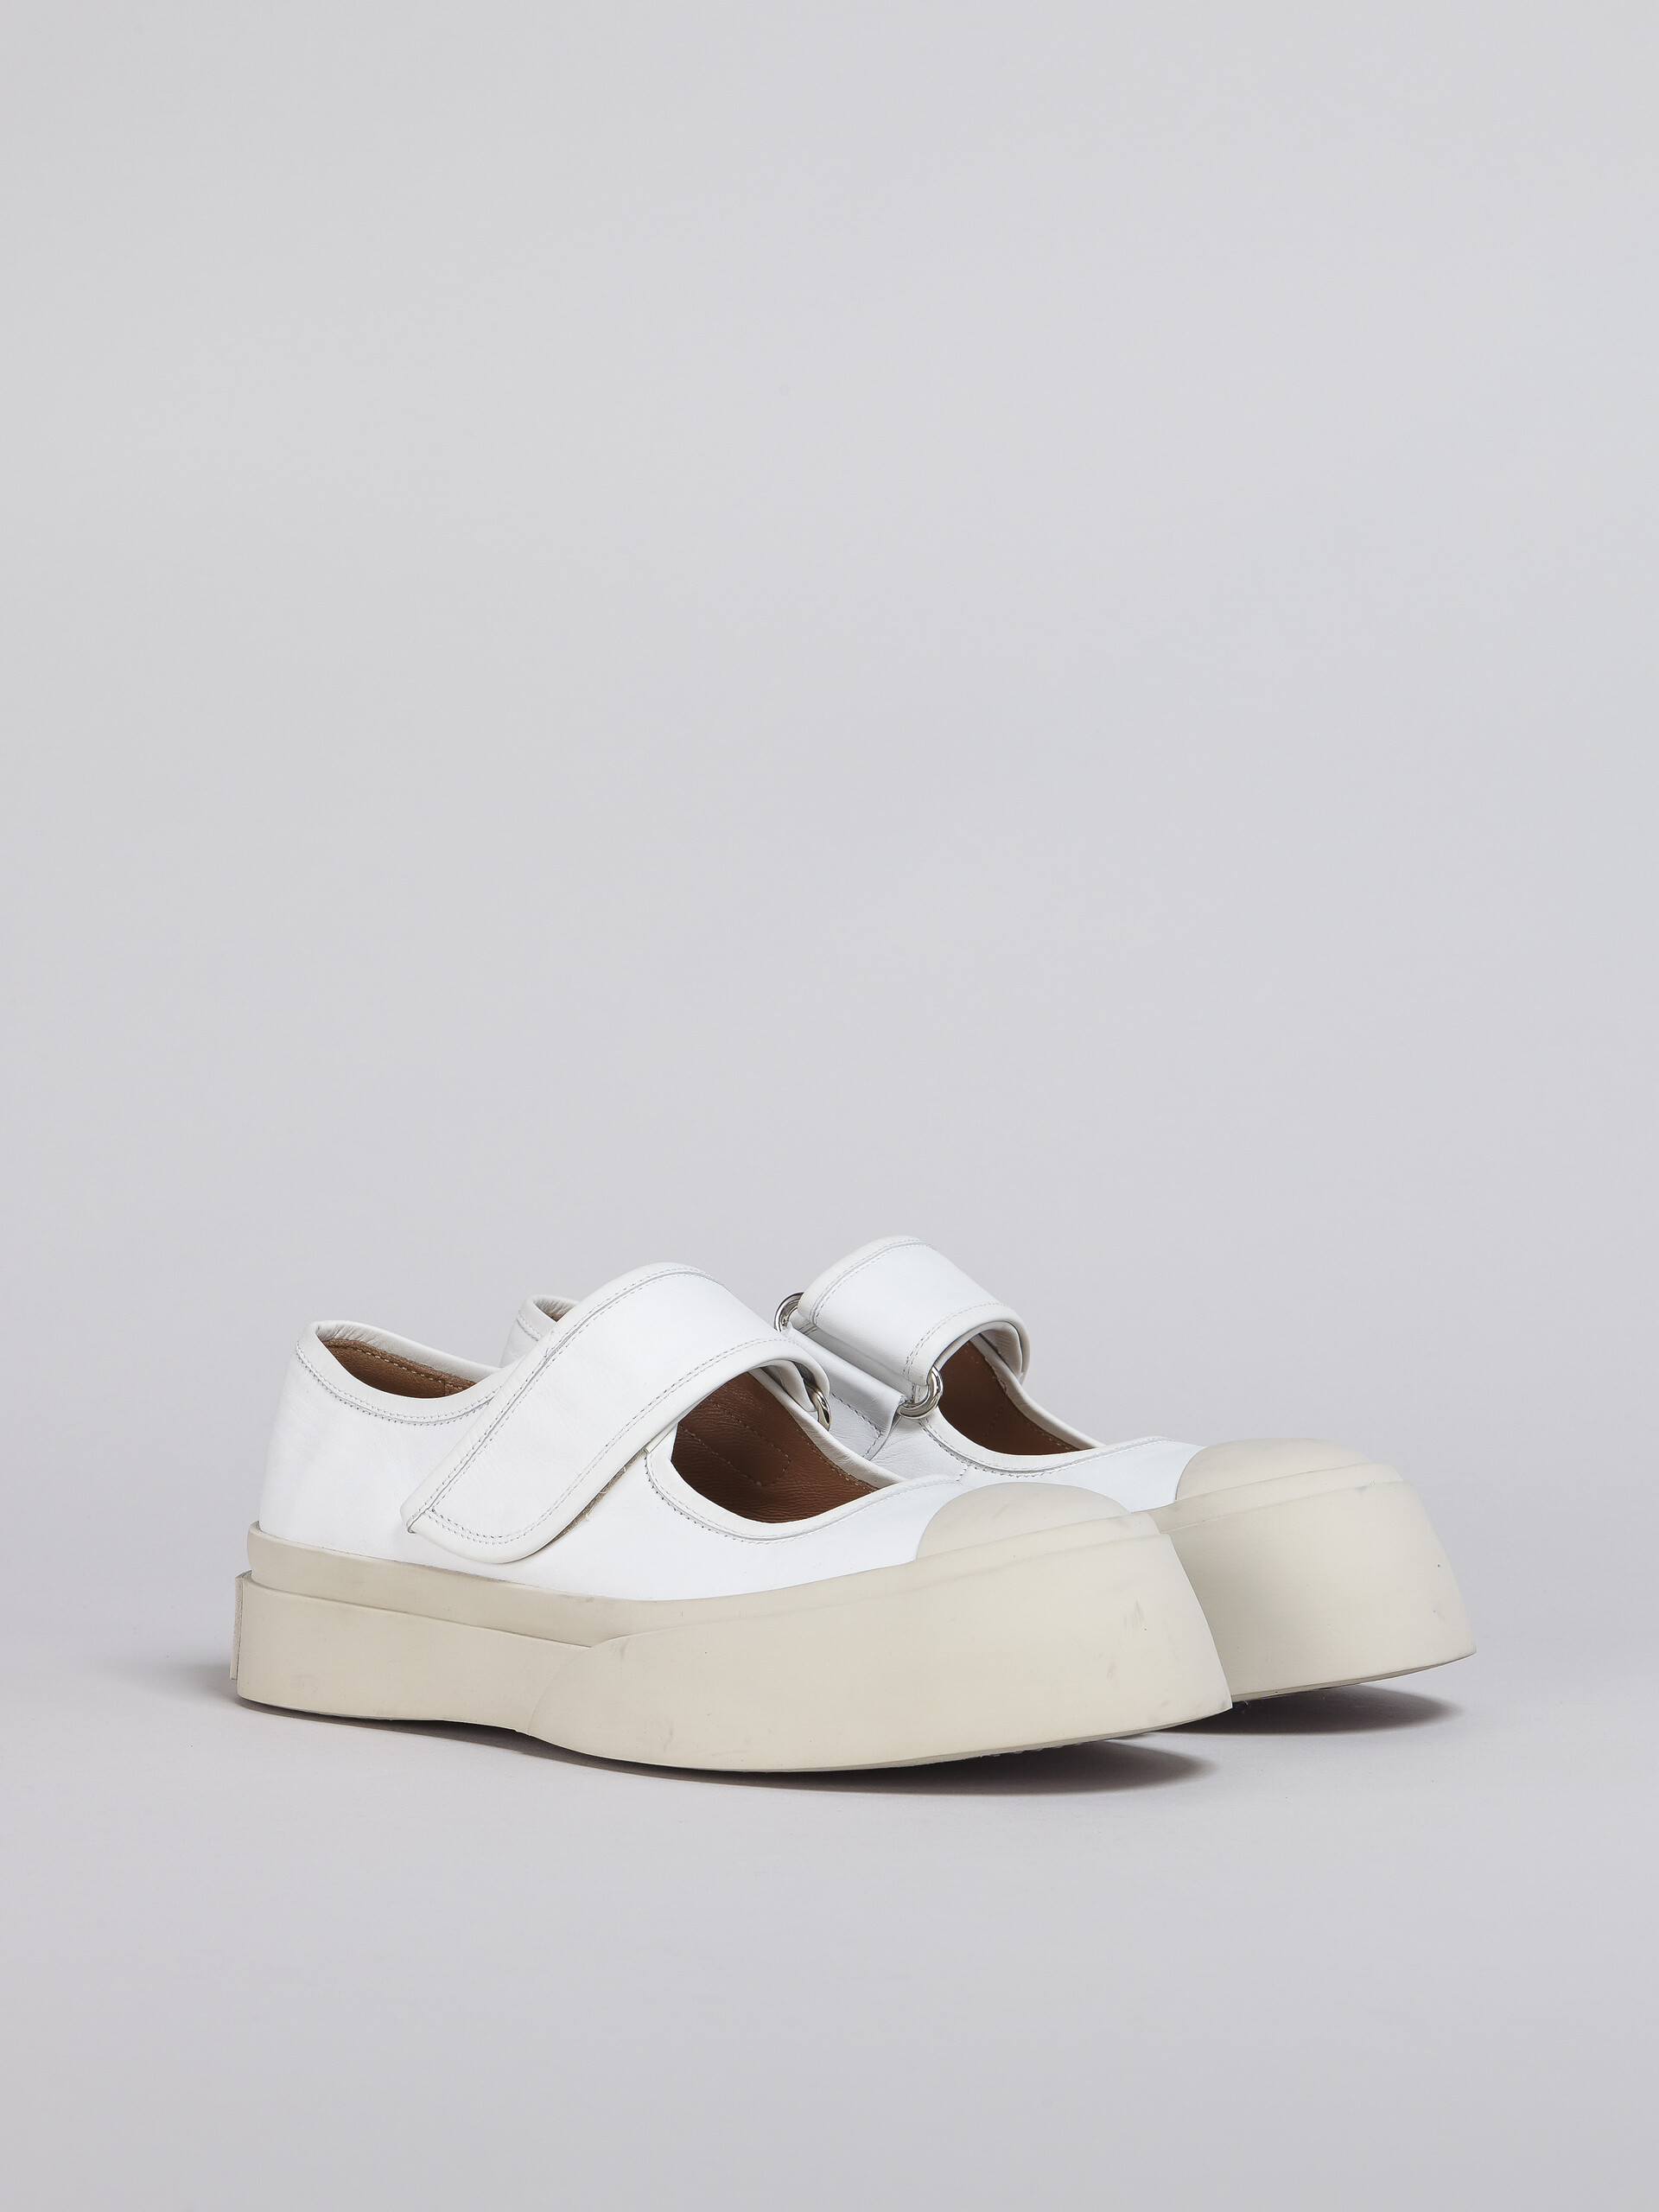 White calf leather PABLO Mary-Jane sneaker - Sneakers - Image 2